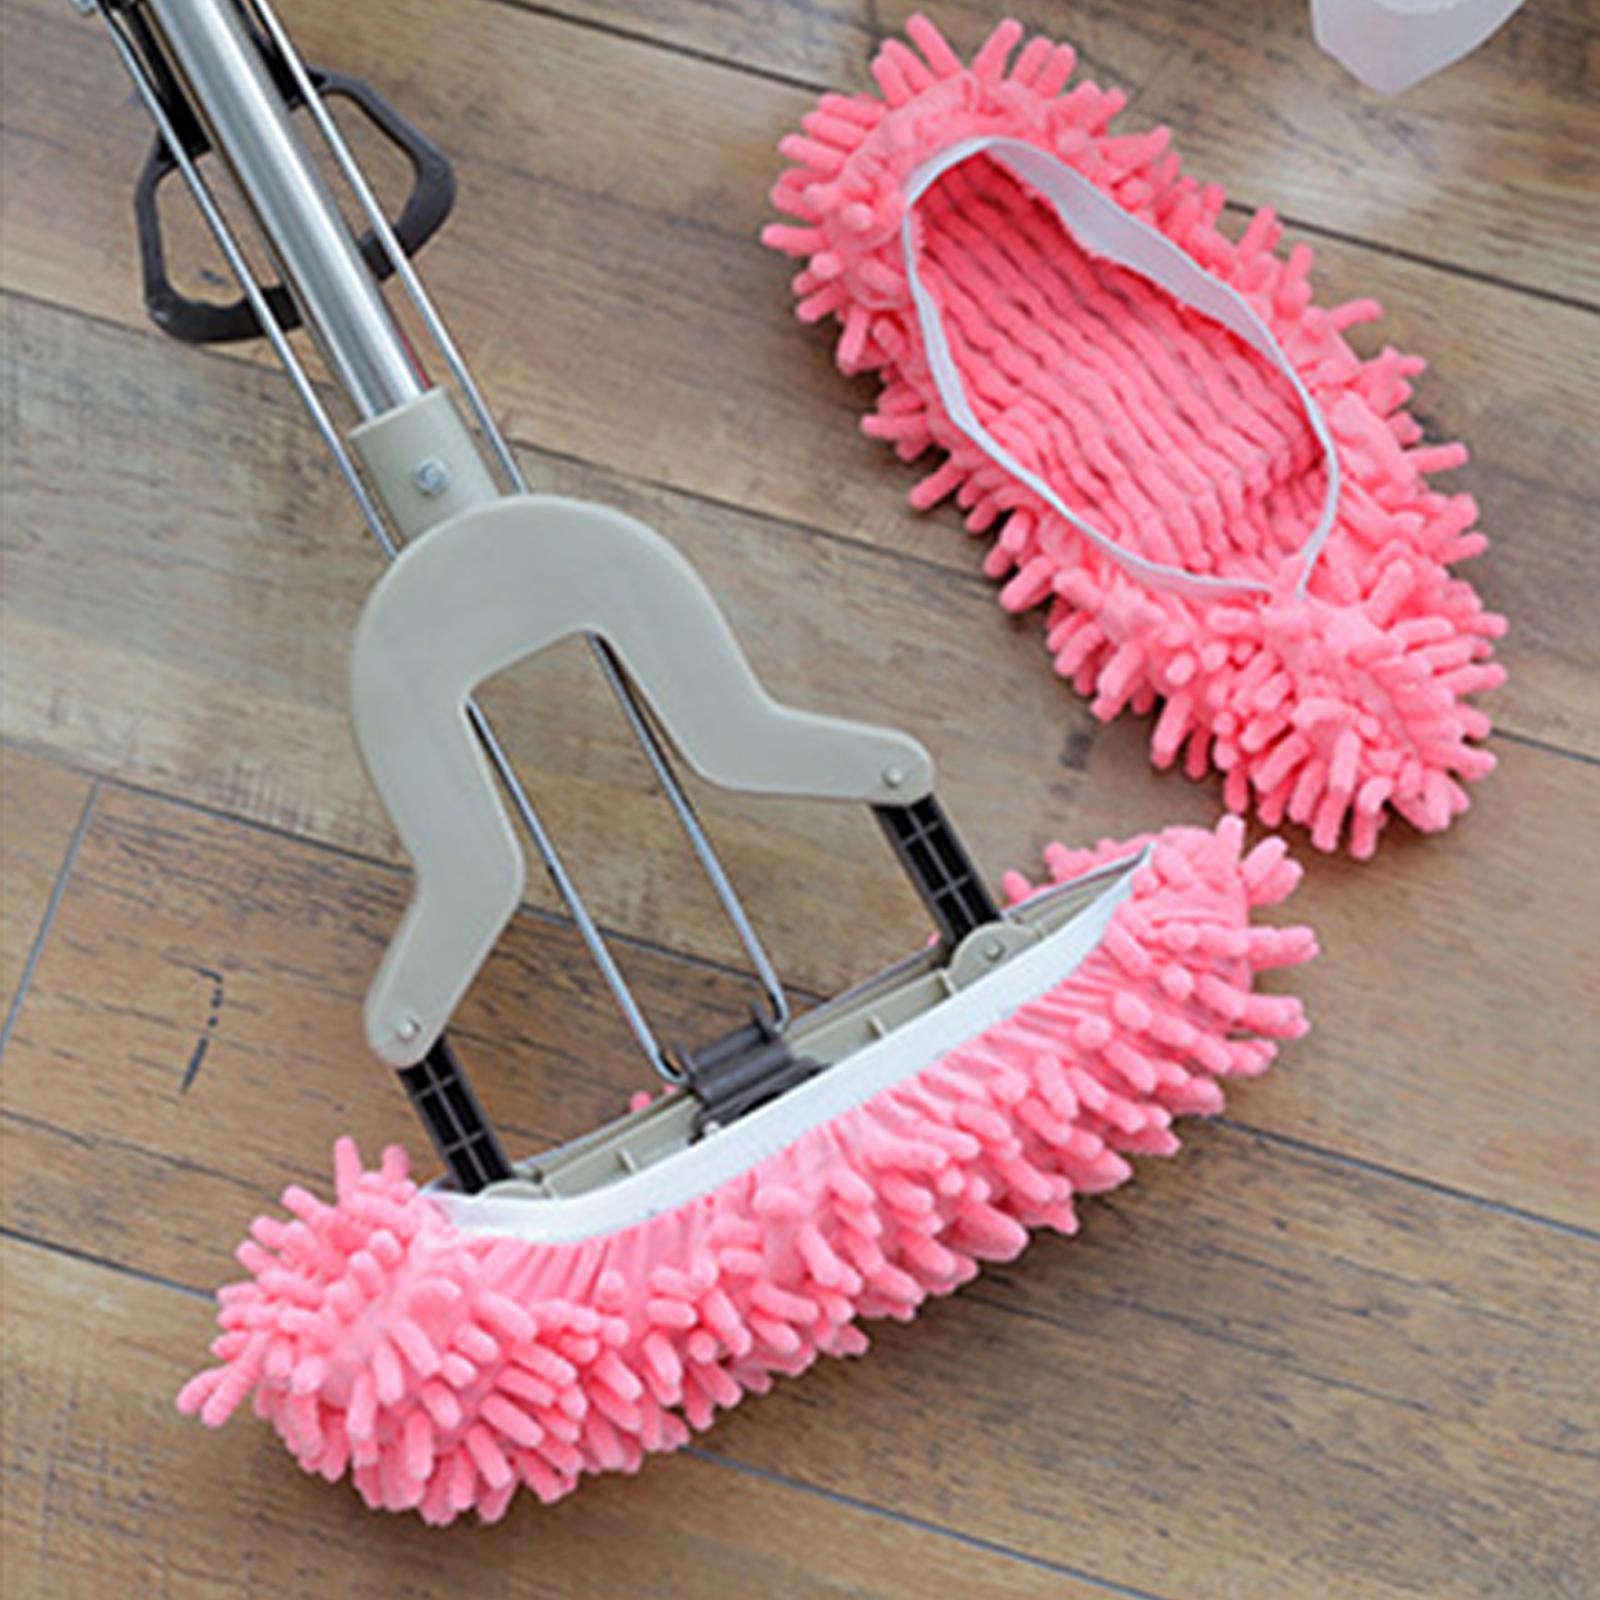 Mop Slippers Cleaner Shoes Cover for House Bathroom Floor Cleaning Pink